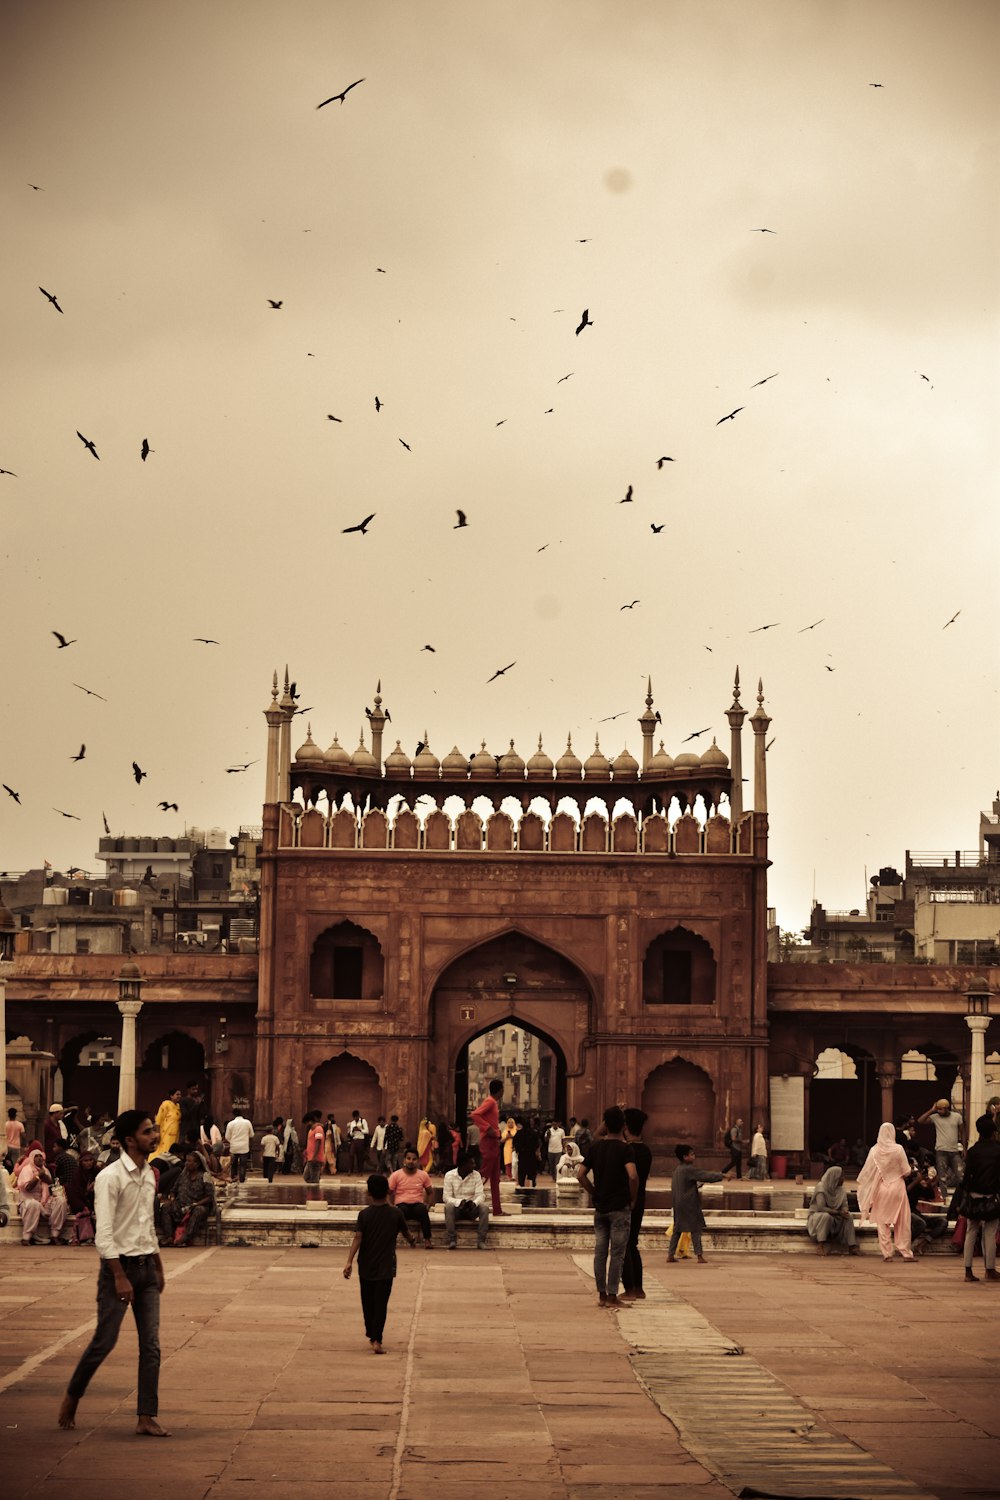 a large group of people in front of Jama Masjid, Delhi with many birds flying